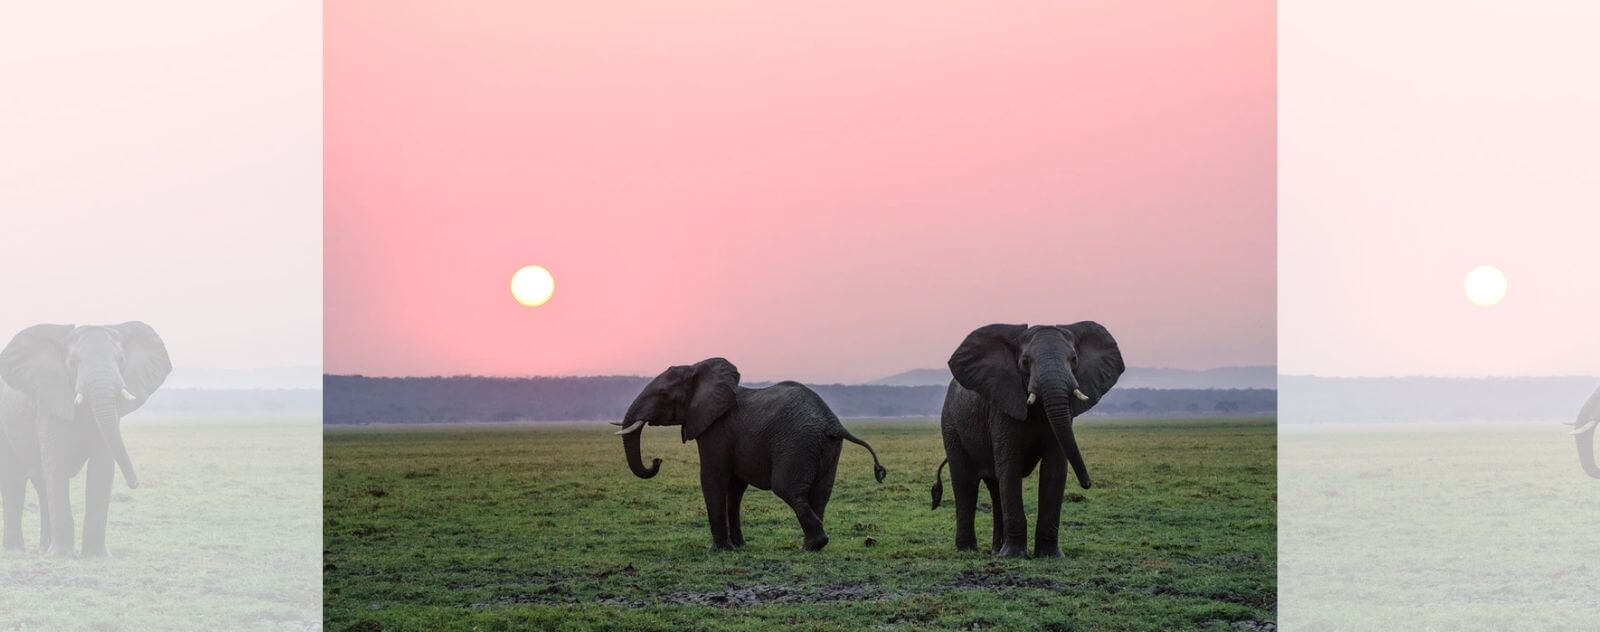 Elephant in the Savannah at Sunset